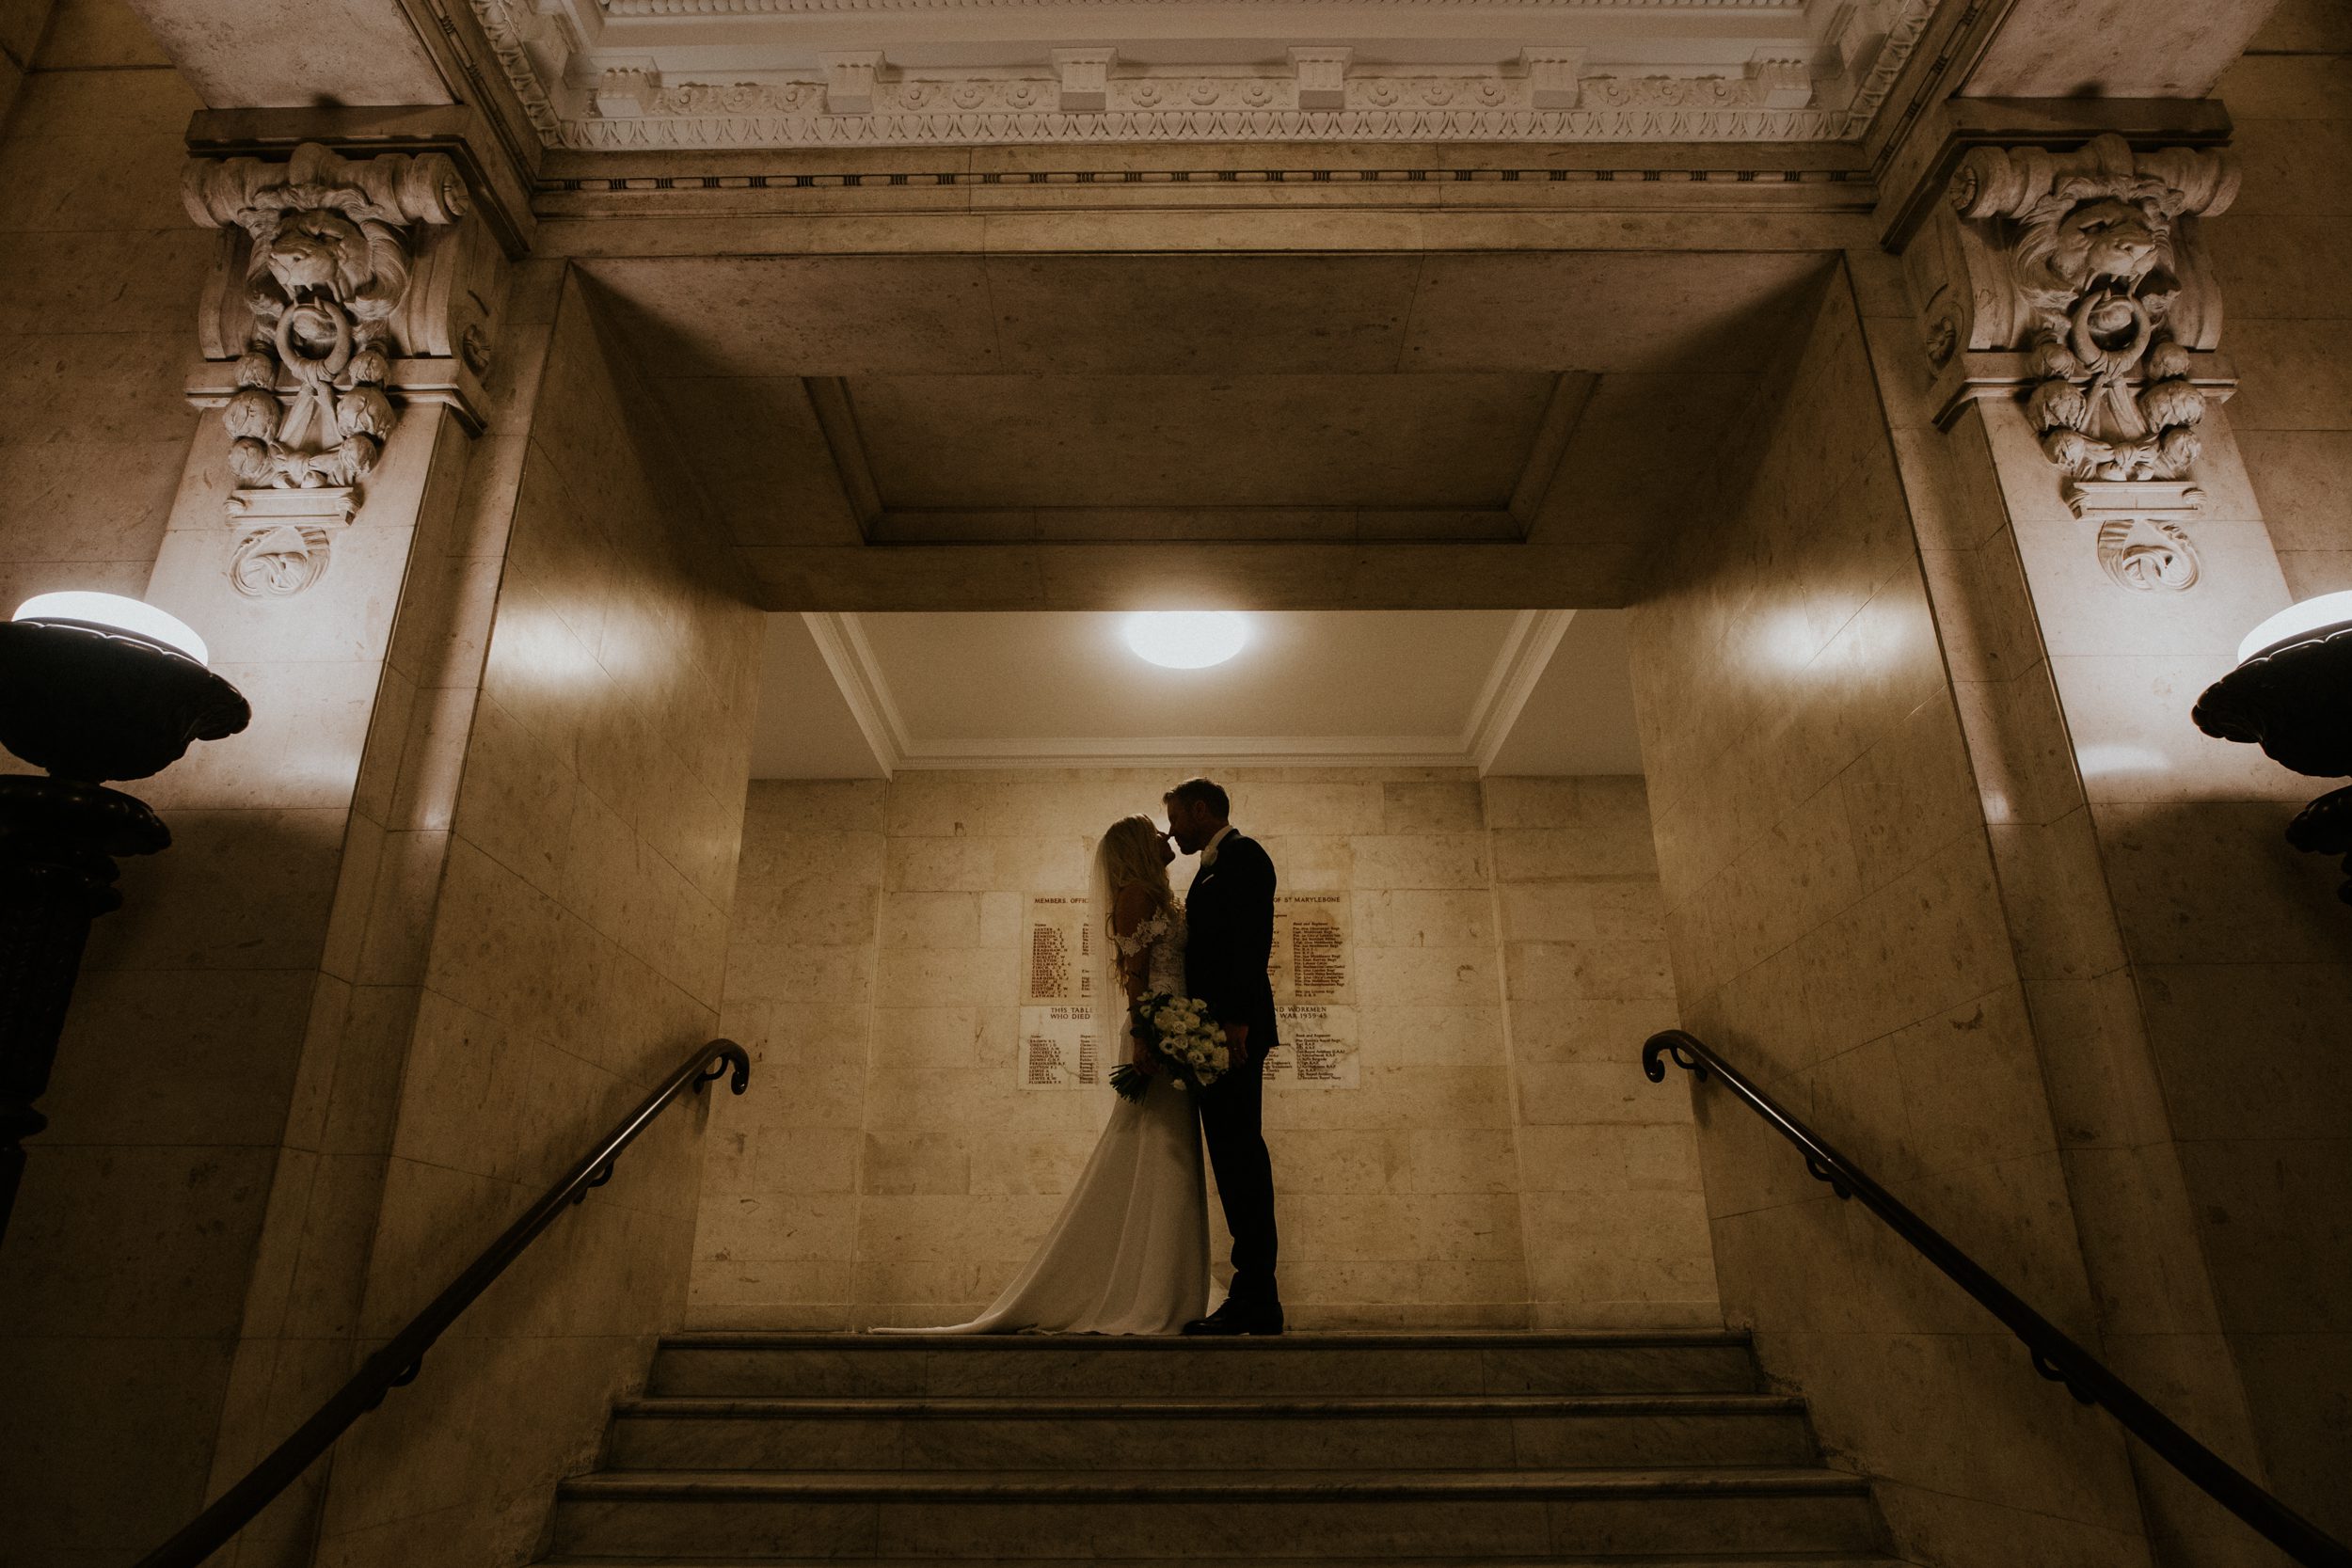 A bride and groom share a quiet moment after their wedding ceremony at Old Marylebone Town Hall, London. Old Marylebone Town Hall wedding photography